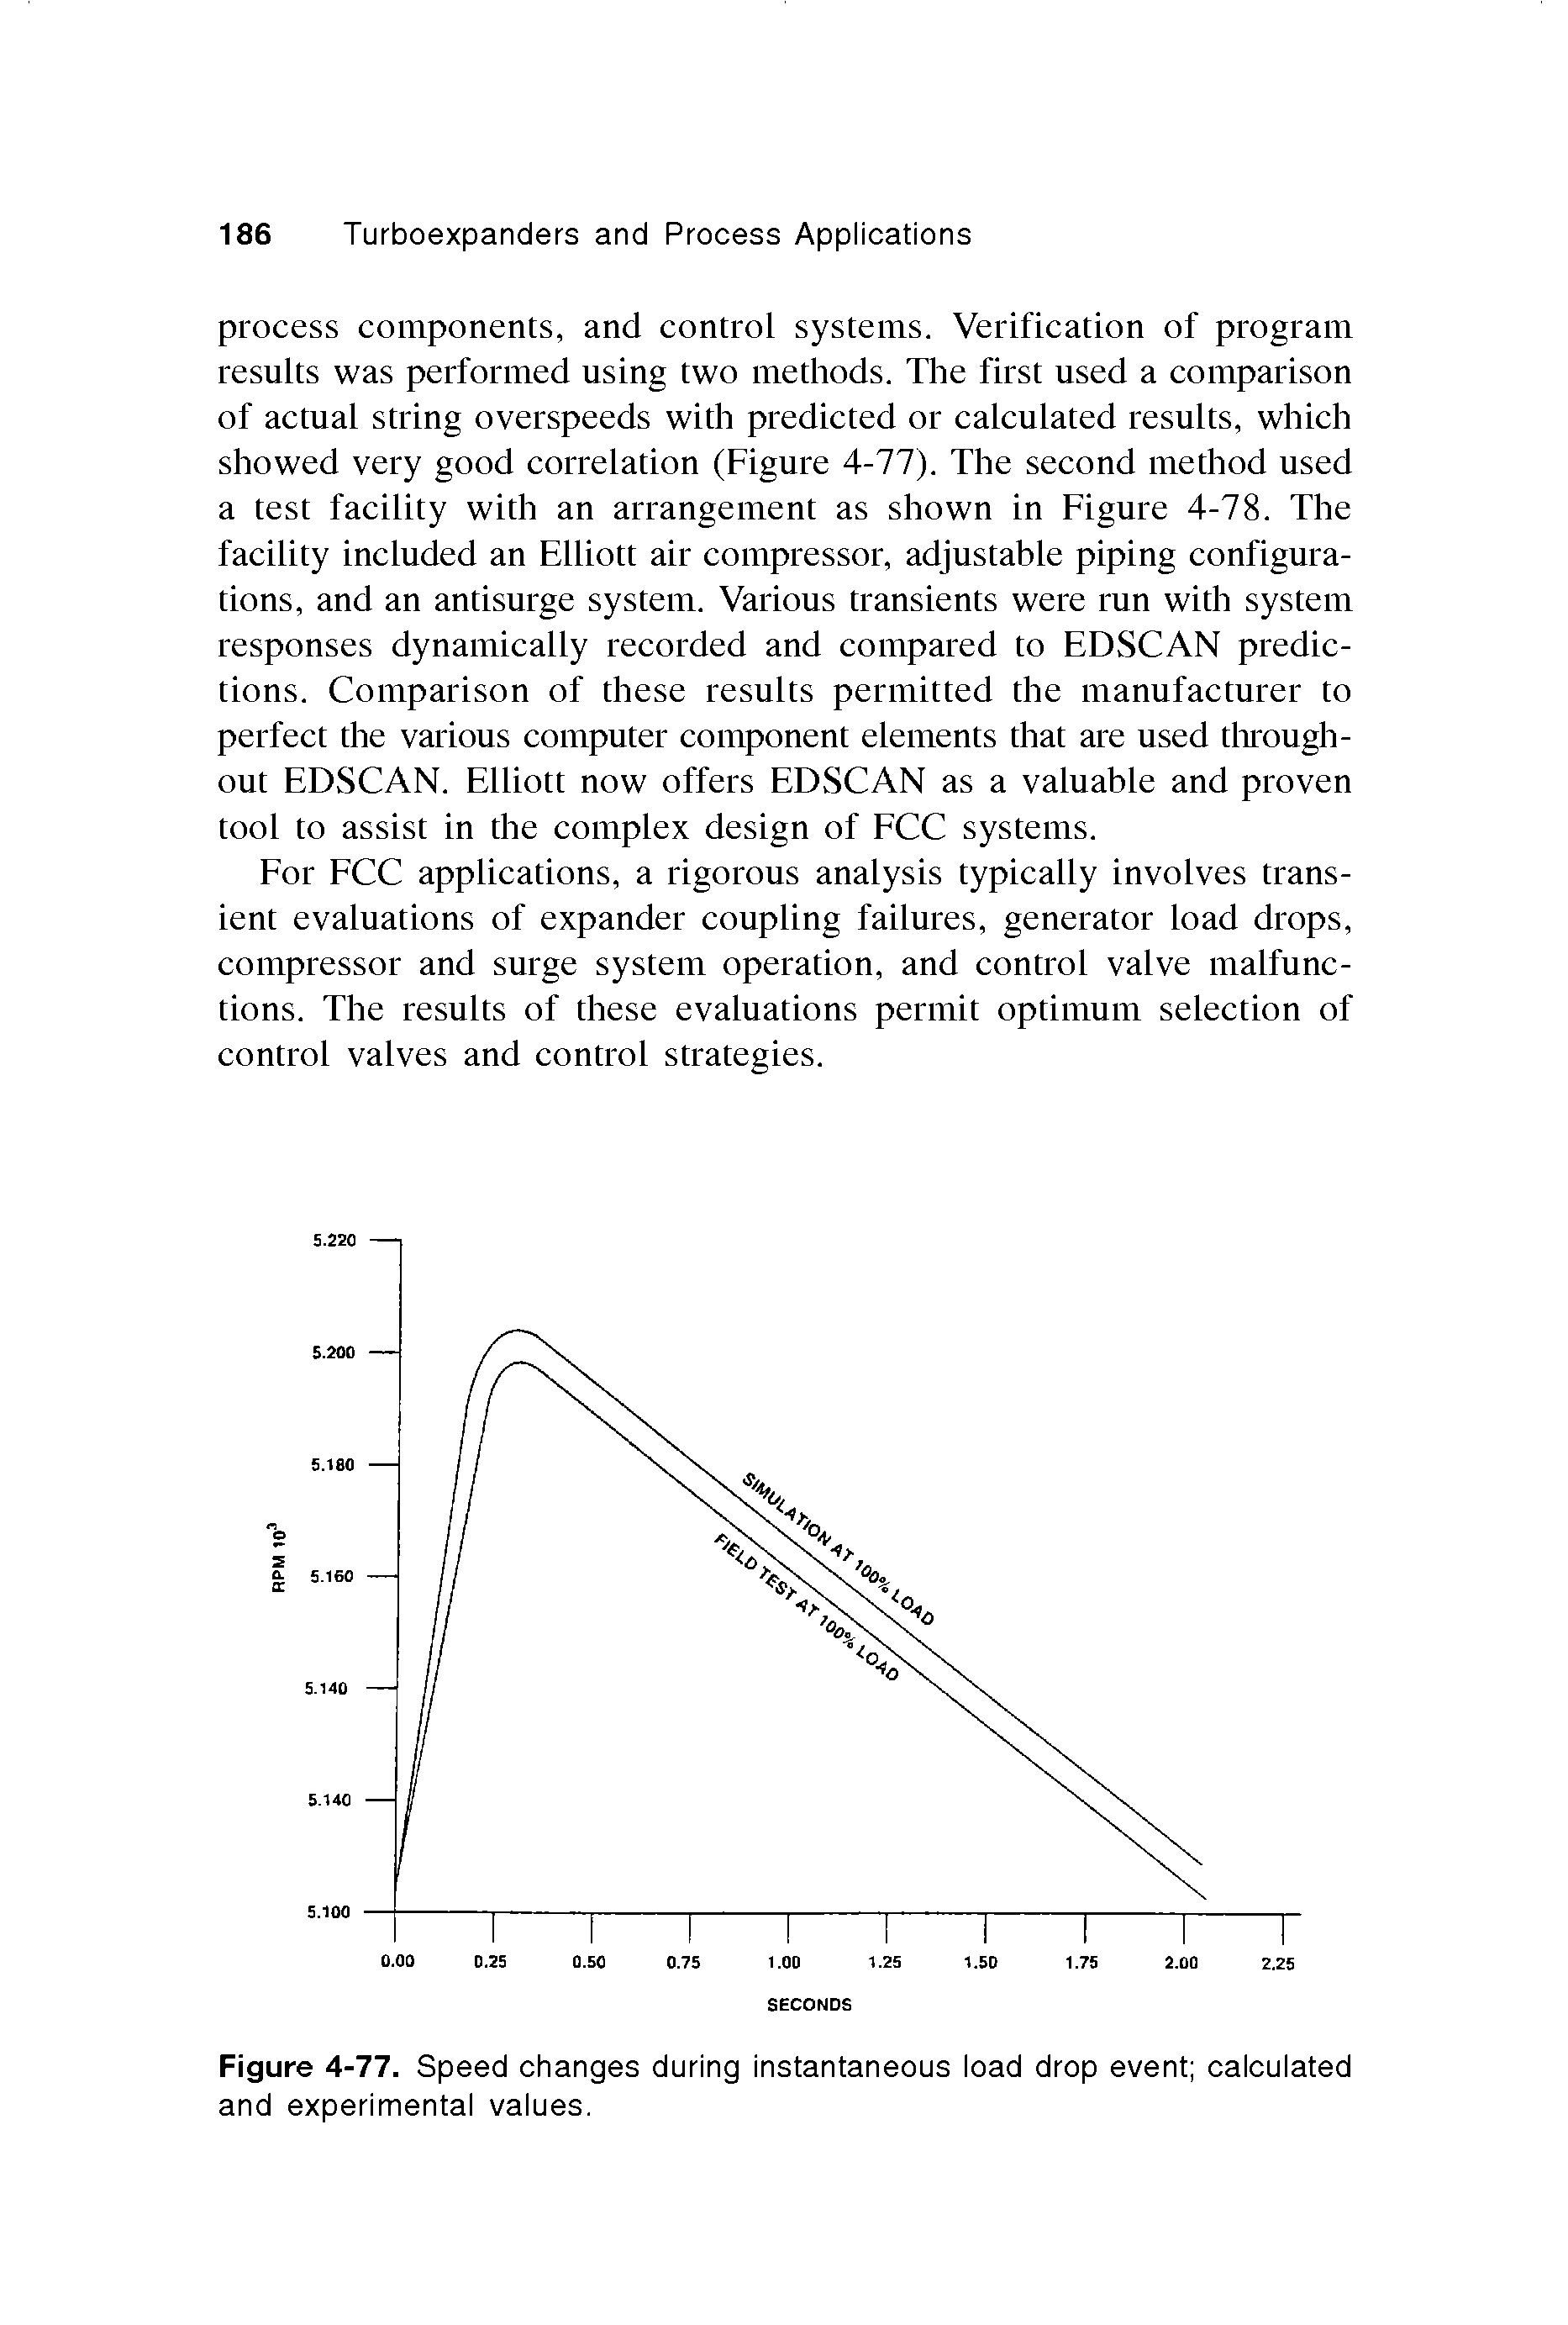 Figure 4-77. Speed changes during instantaneous load drop event calculated and experimental values.